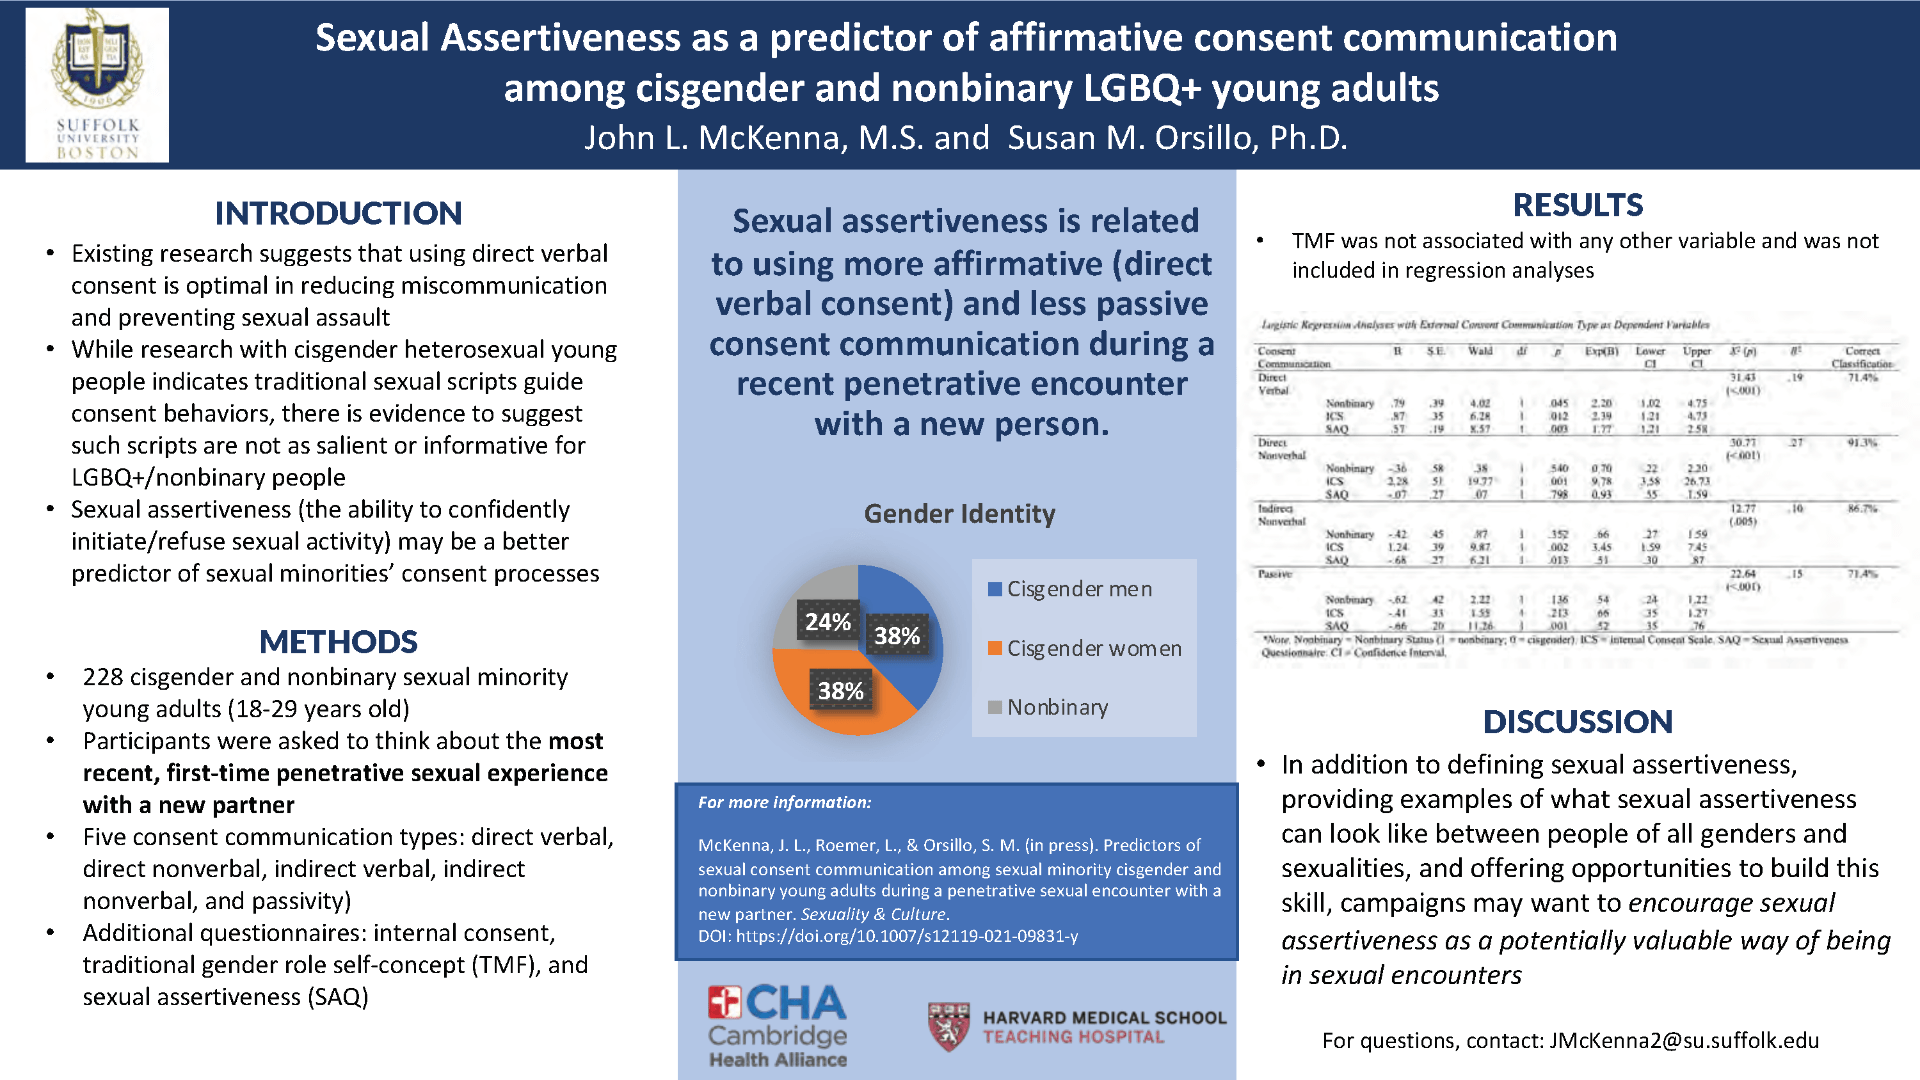 Sexual Assertiveness as a Predictor of Affirmative Consent Communication among Cisgender and Nonbinary LGBQ+ Young Adults